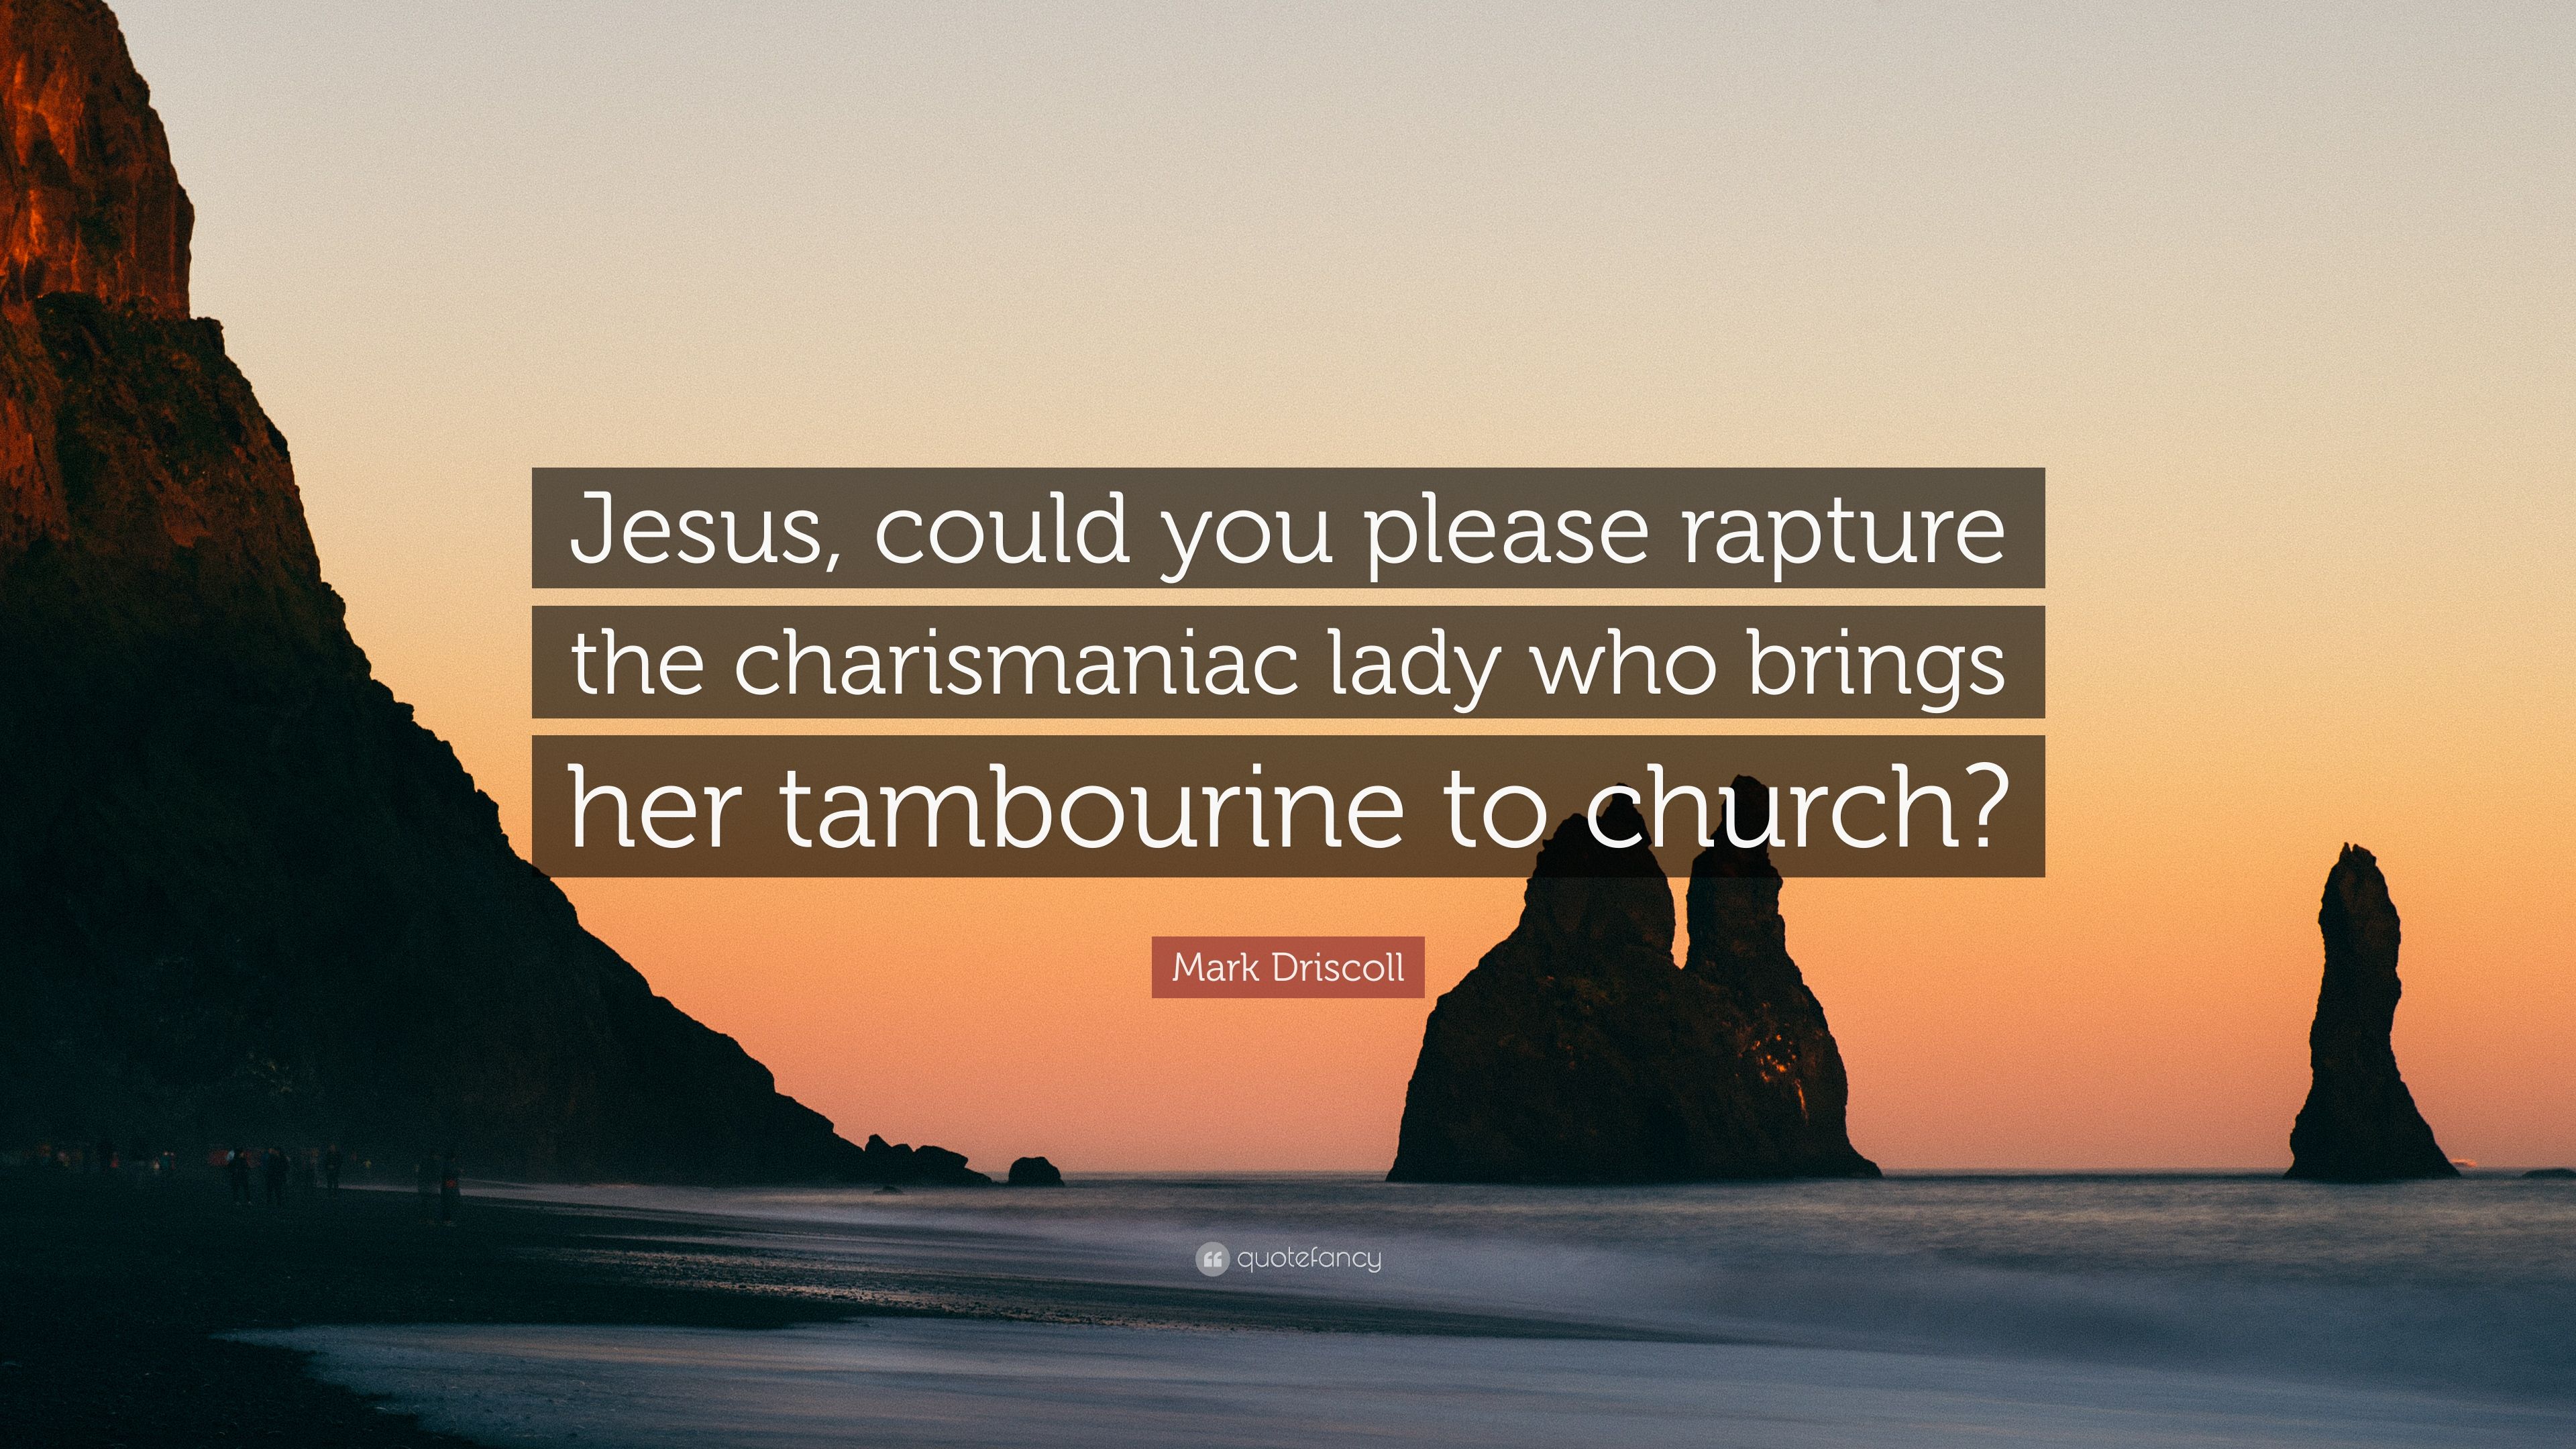 Mark Driscoll Quote: “Jesus, could you please rapture